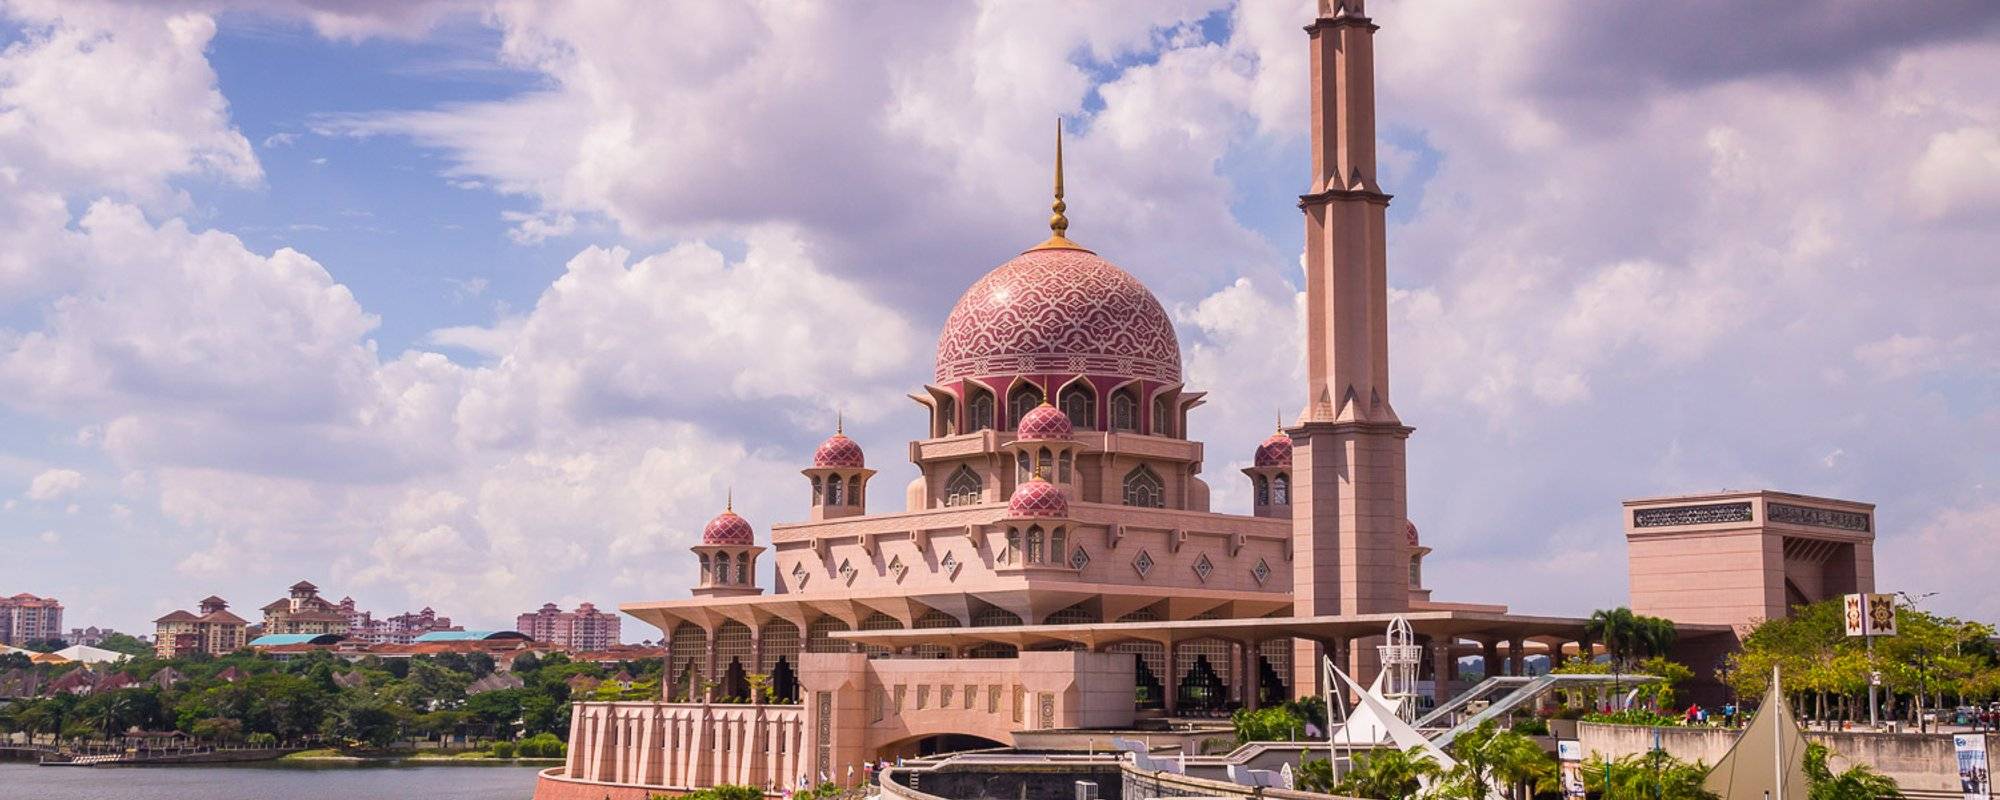 The Story of Putra Mosque in Putrajaya, Malaysia